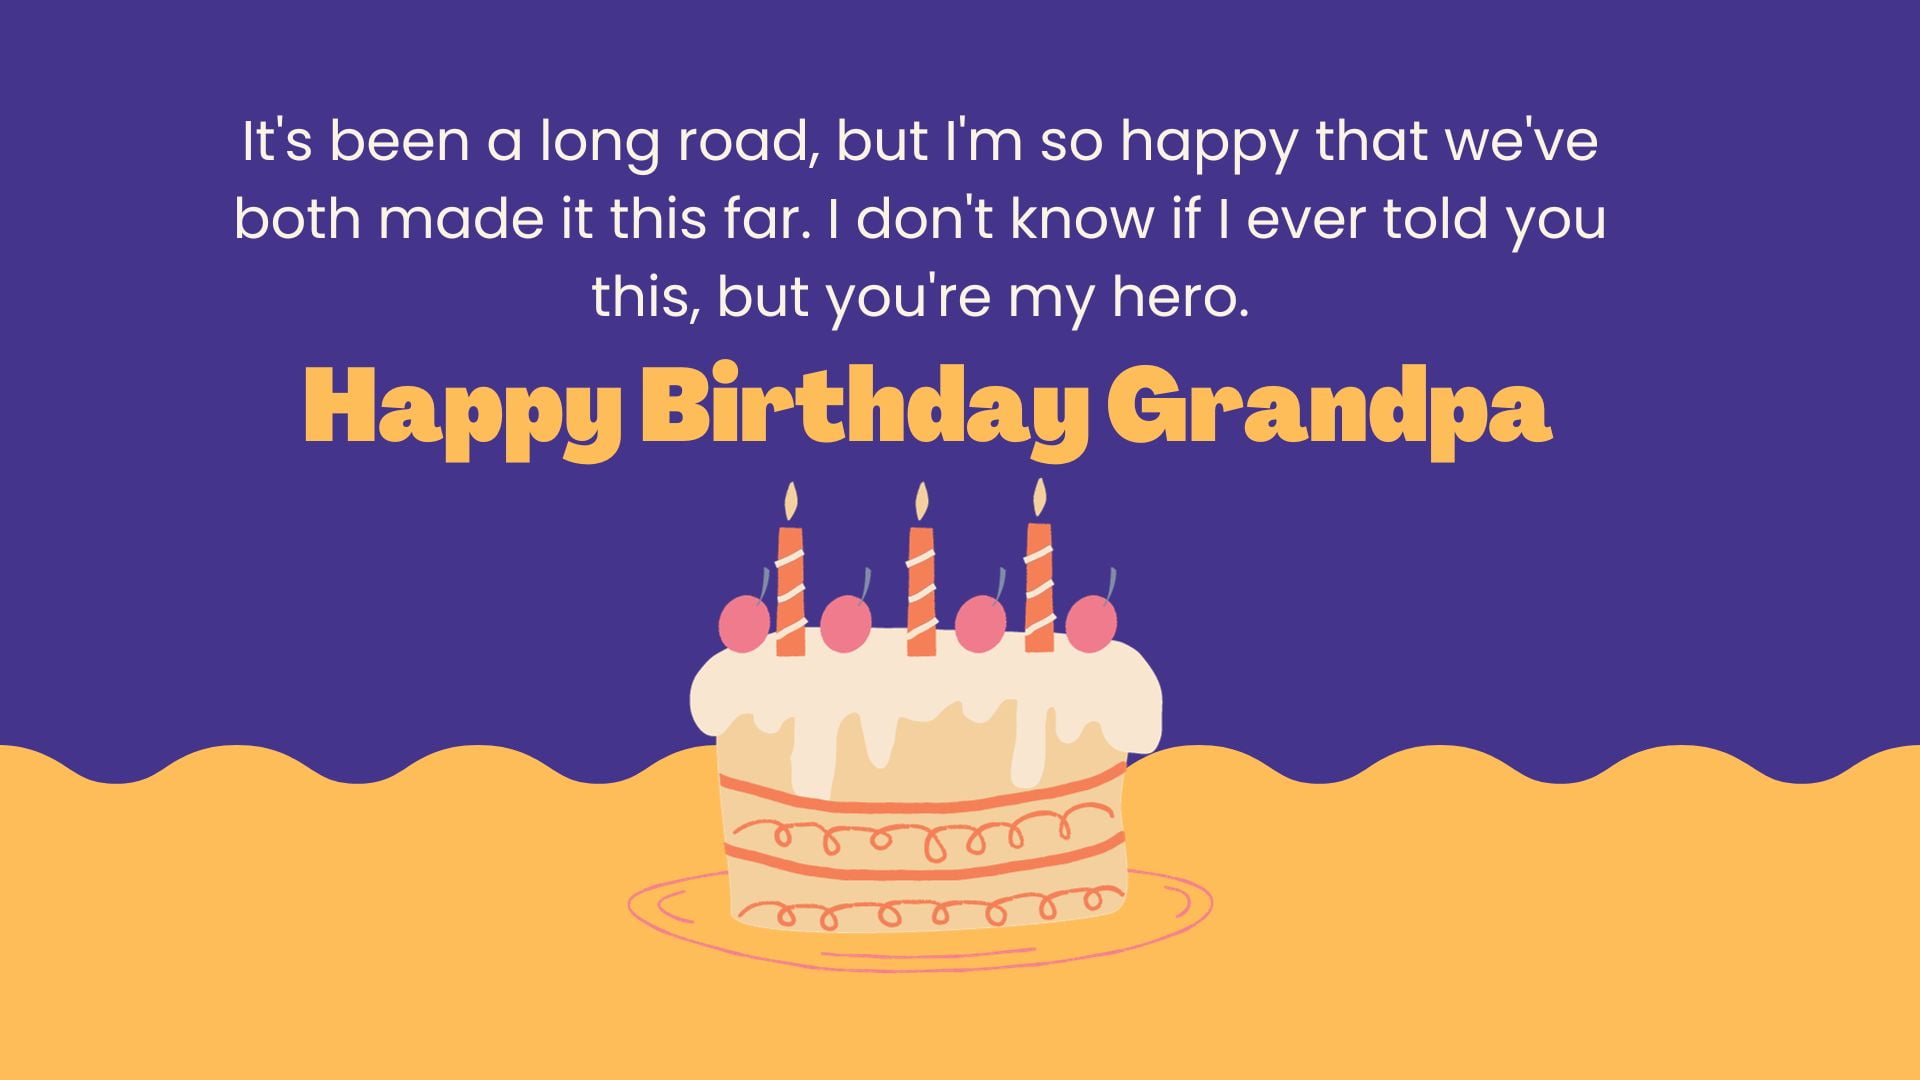 Simple and short birthday wishes for grandfather